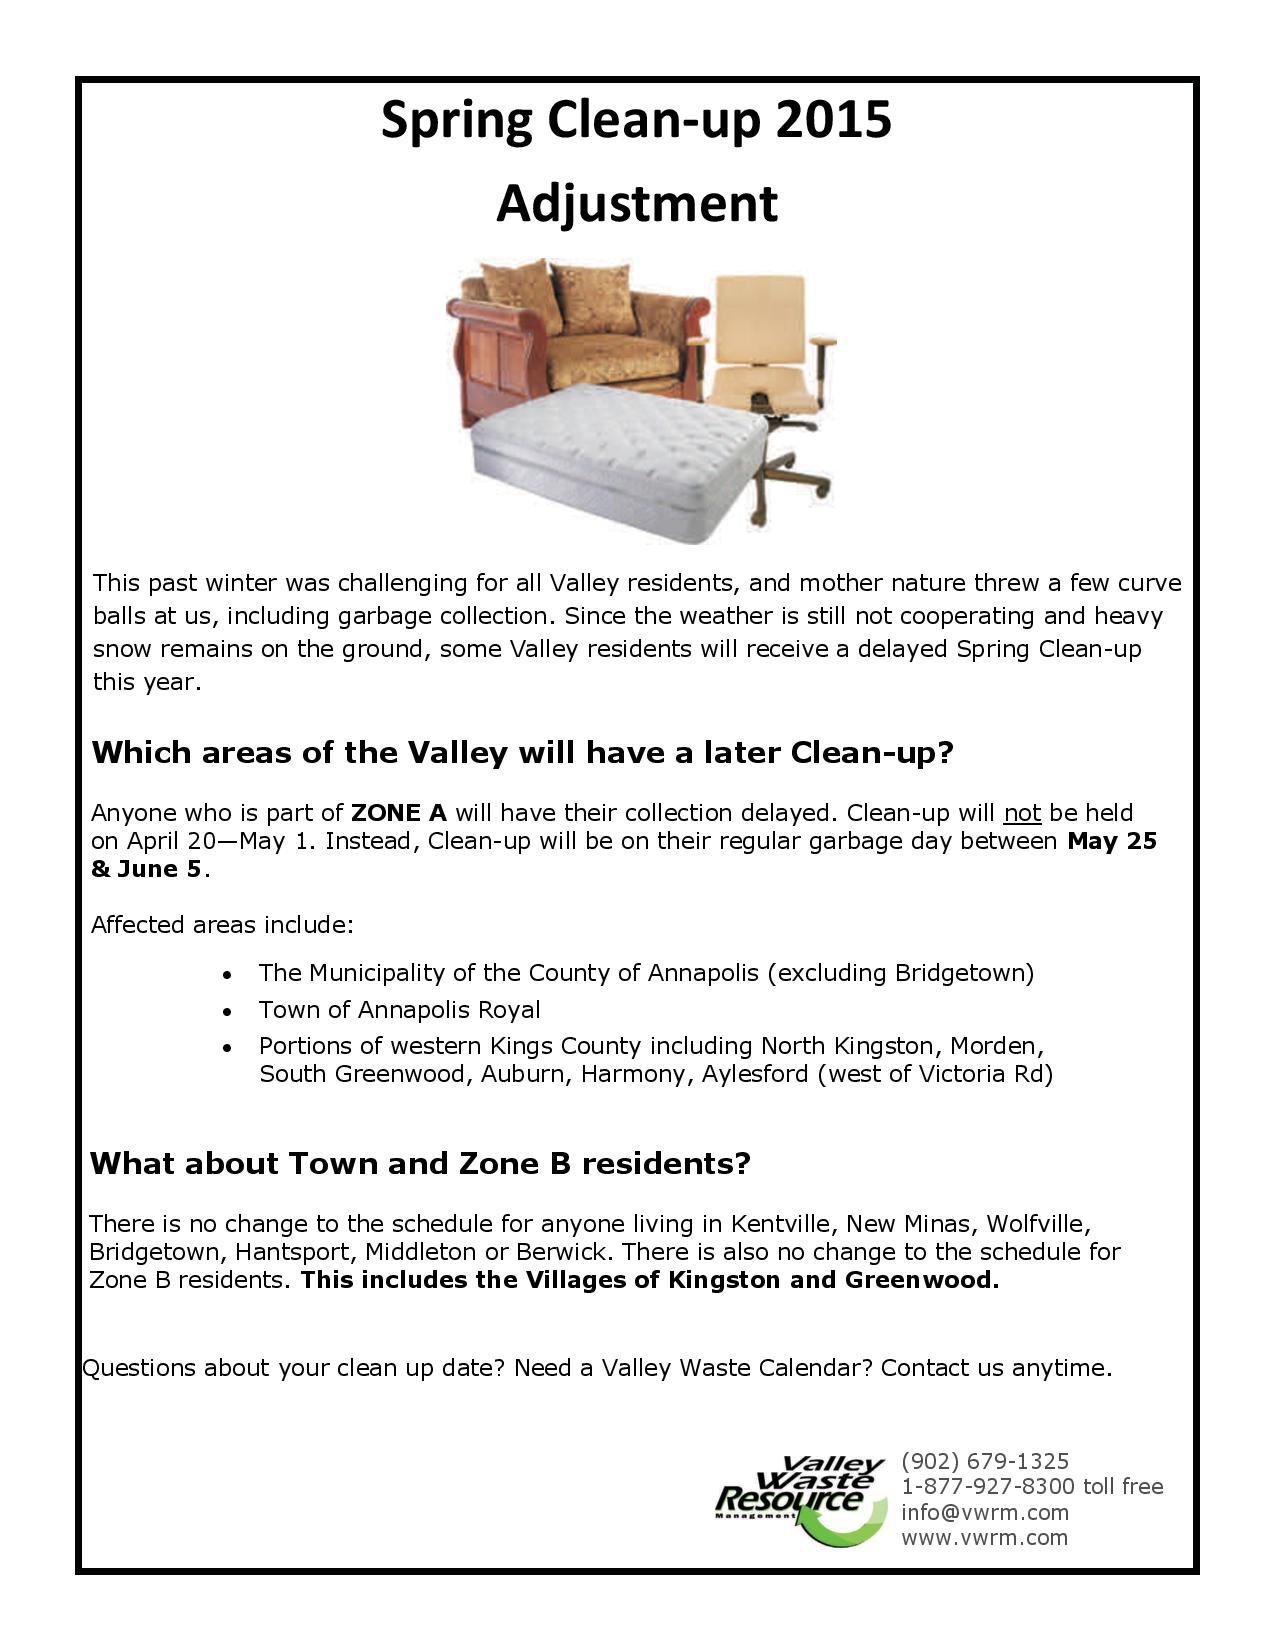 Clean up adjustment flyer 2015 page 001